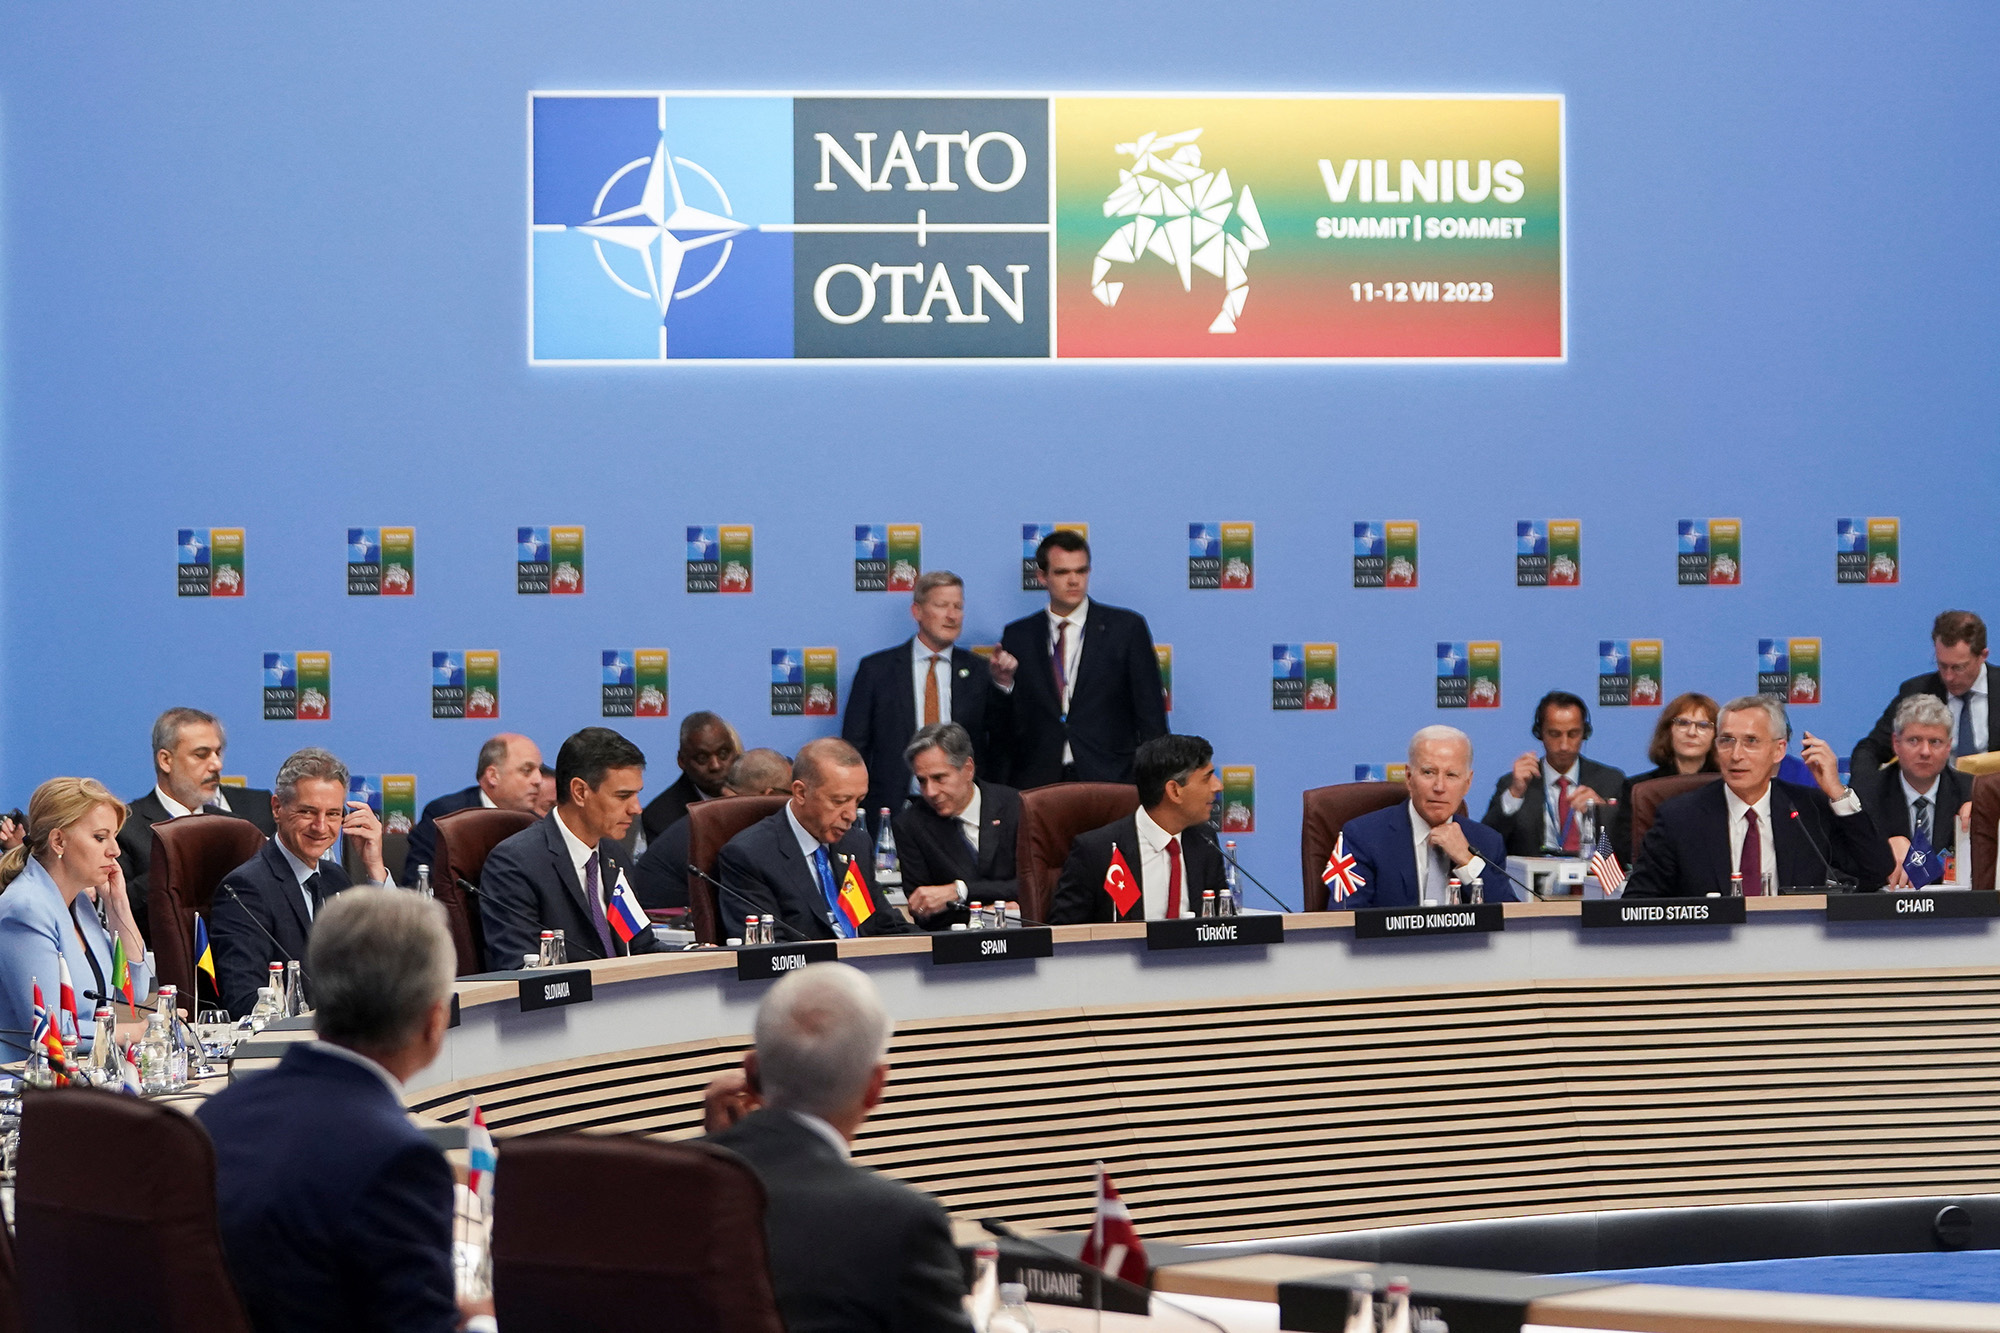 NATO leaders attend the Meeting of the North Atlantic Council at the level of Heads of State and Government, at the NATO summit in Vilnius, Lithuania, on July 11.